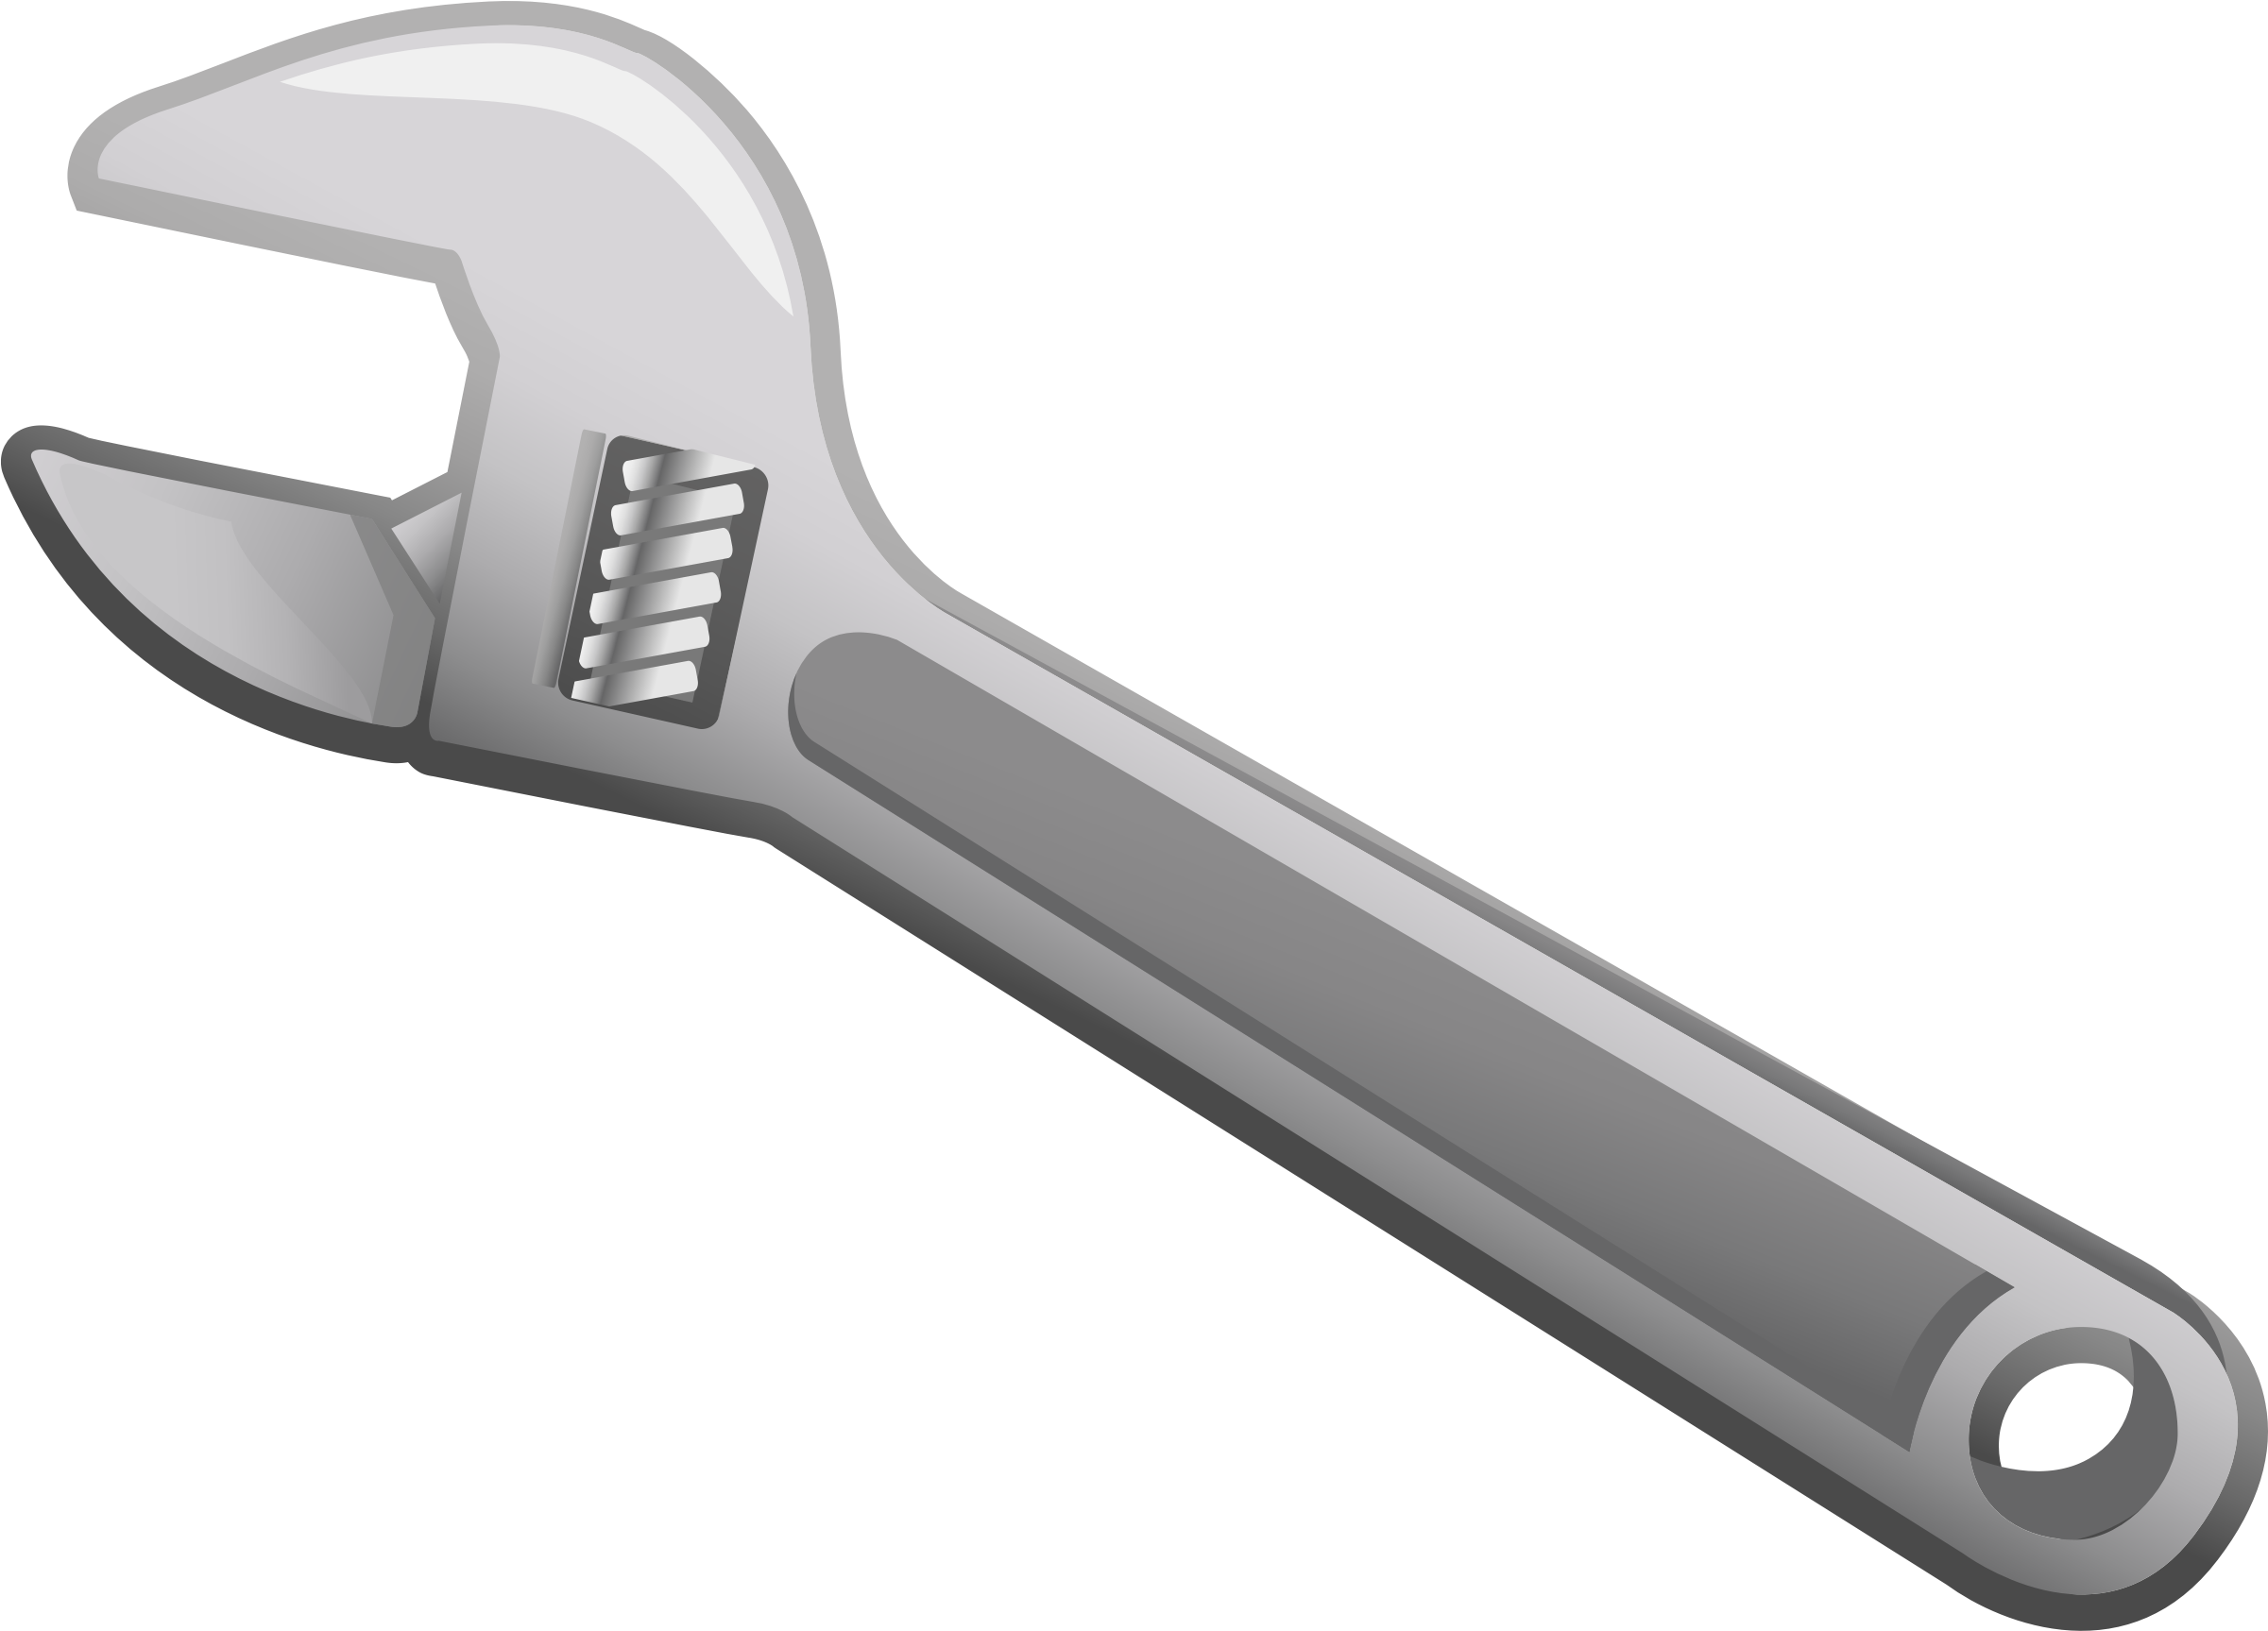 Wrench Clipart - Wrench Clipart.